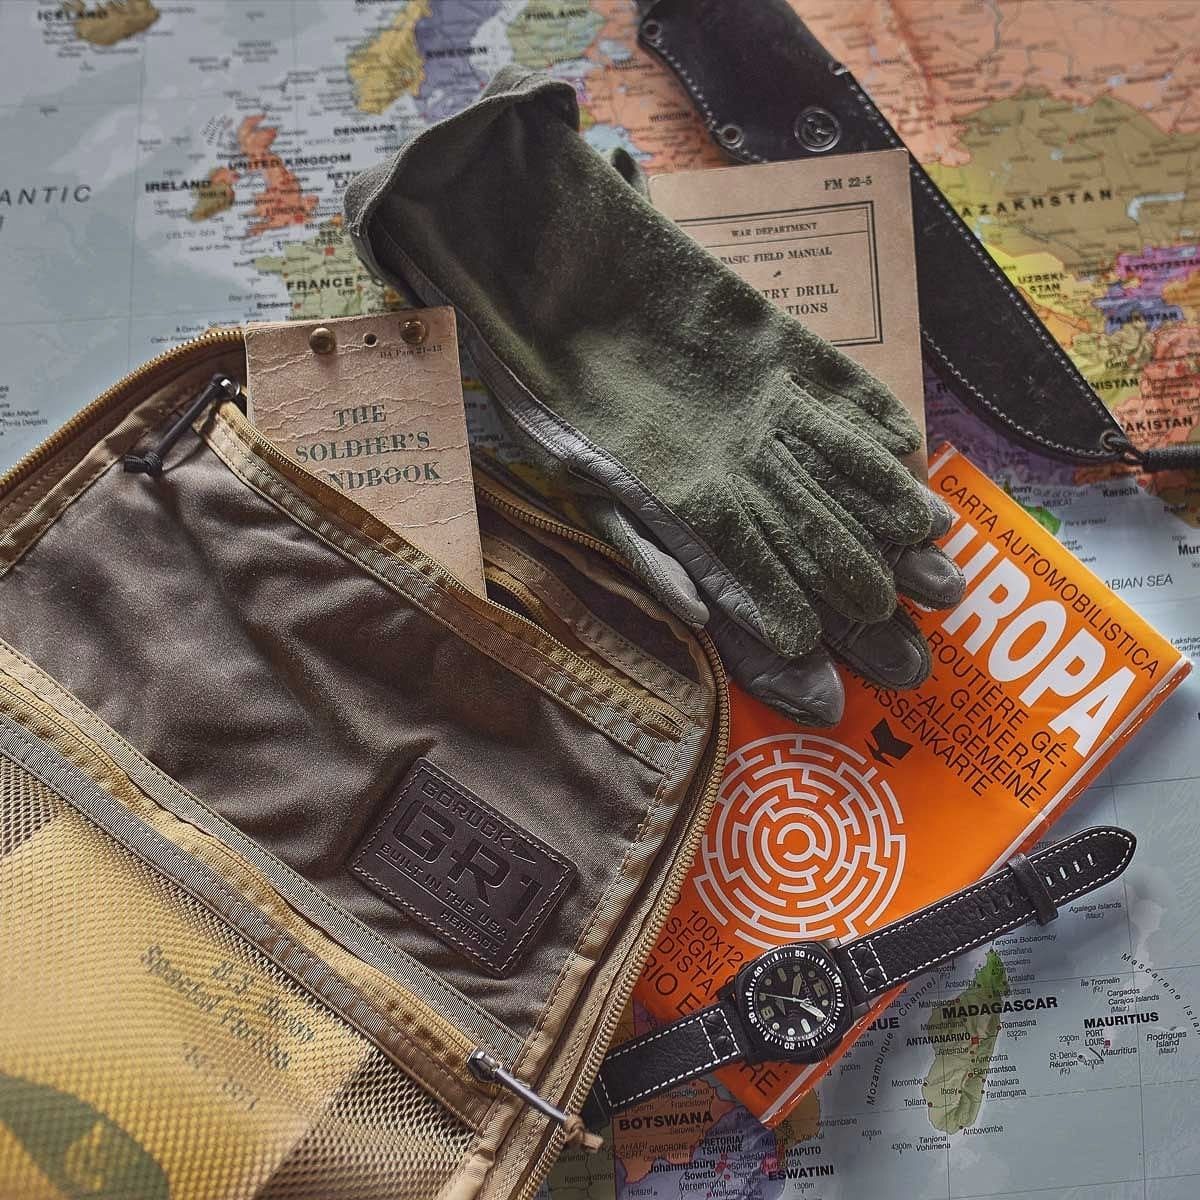 Huckberry Is Offering 20% Off Their Entire Site To Veterans, Active ...